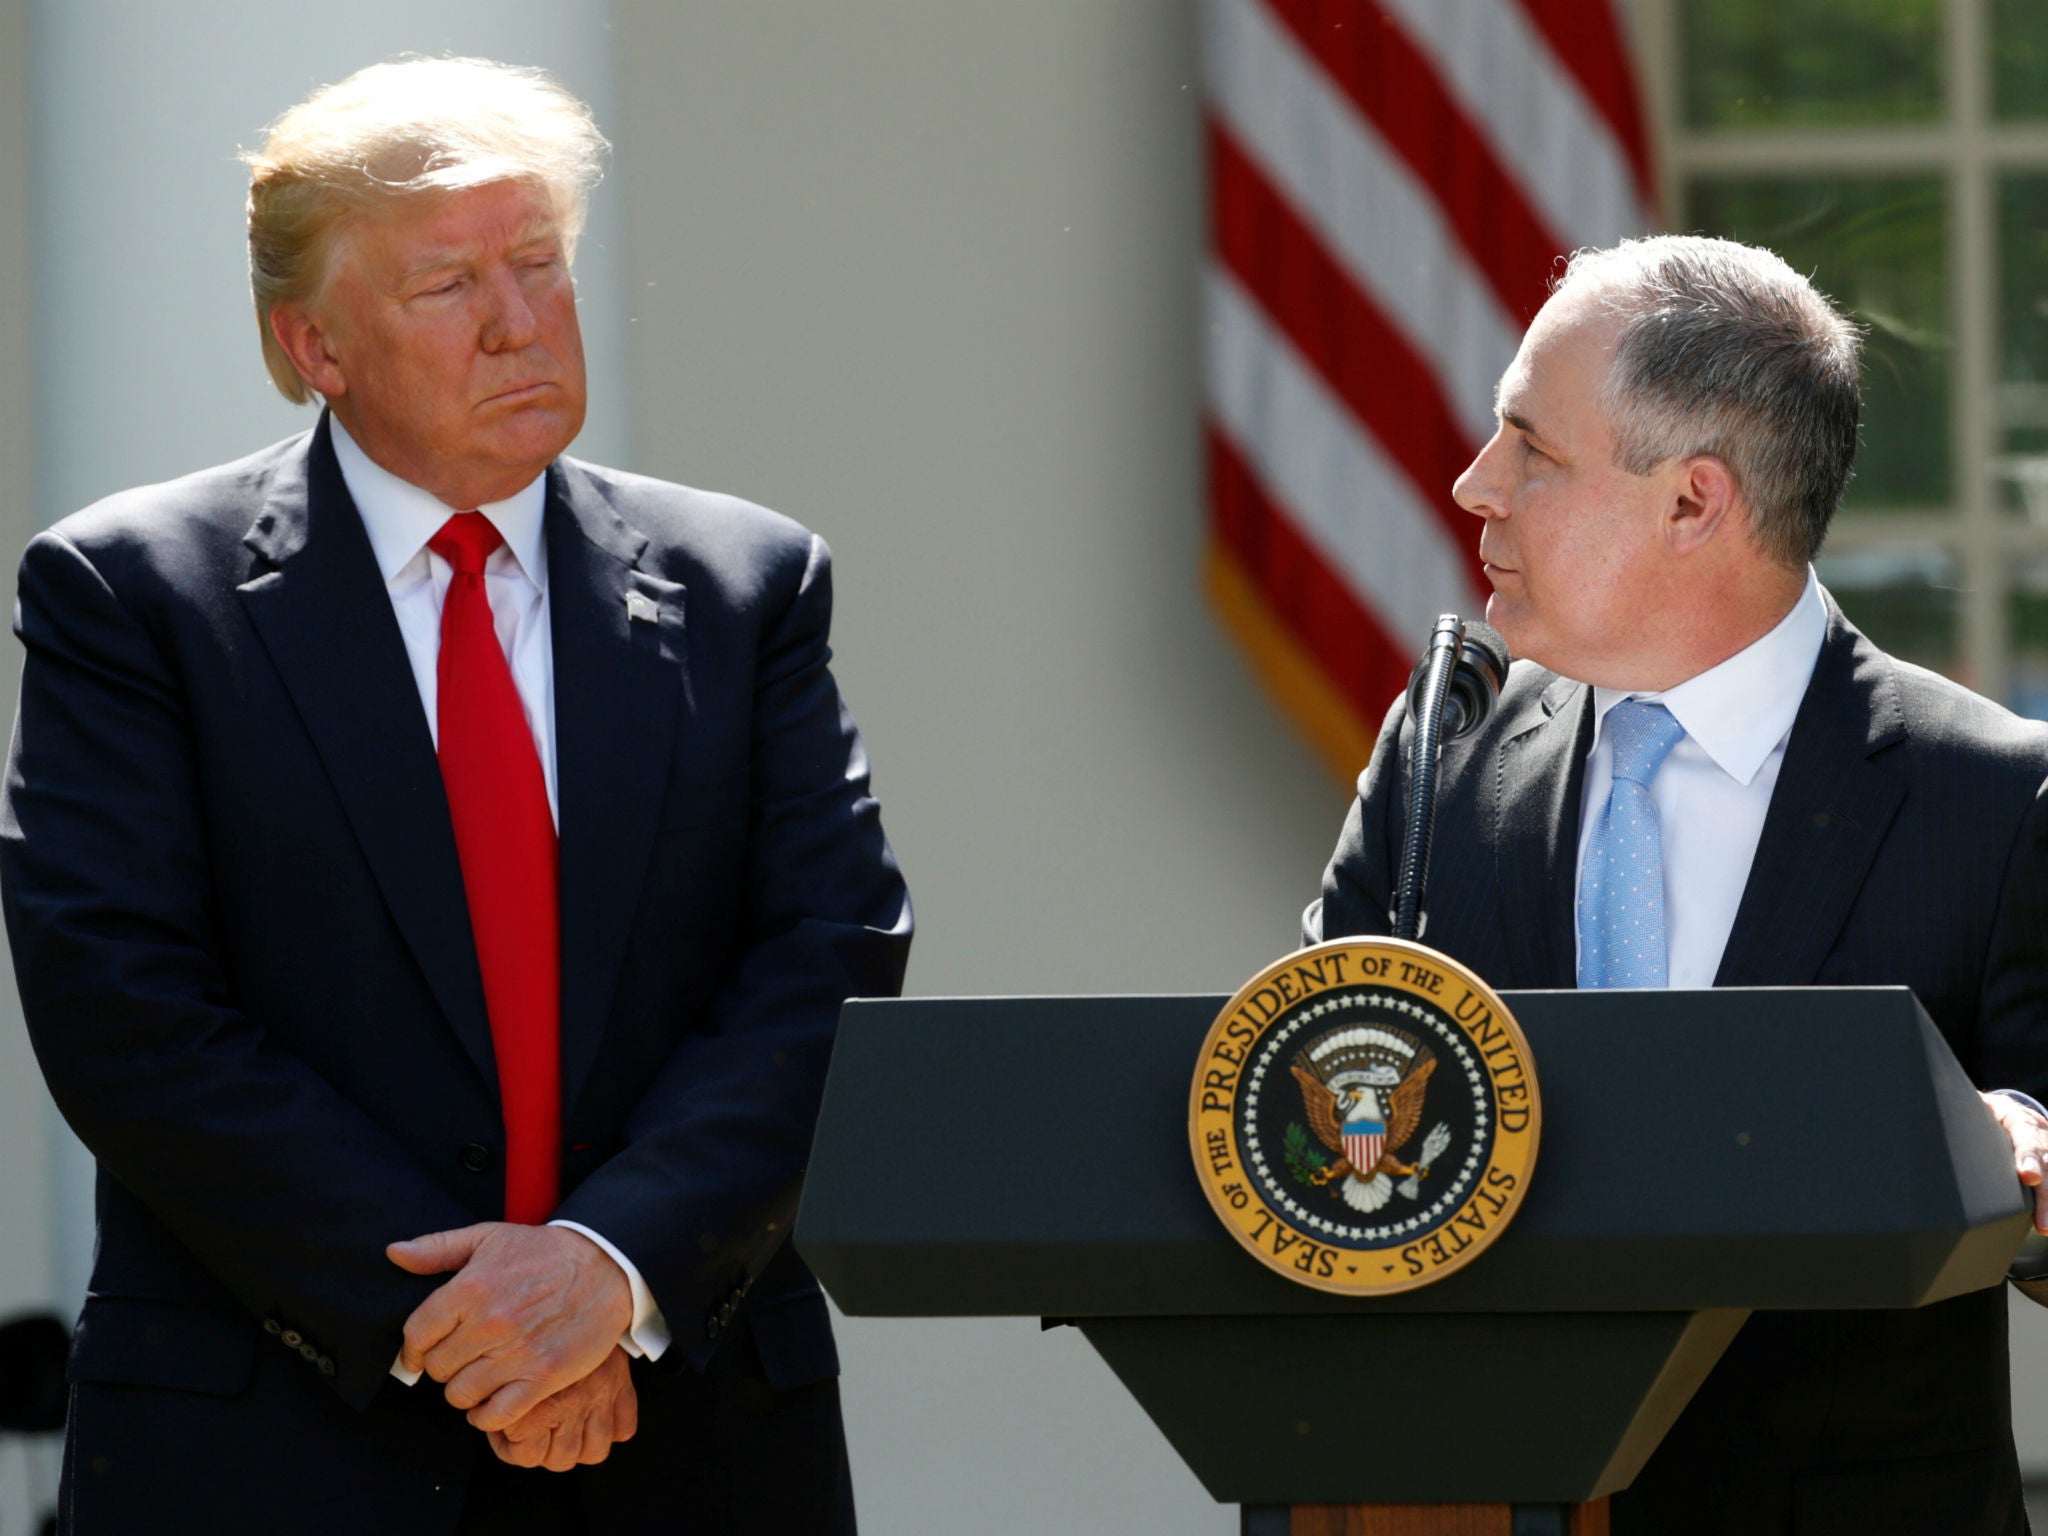 Scott Pruitt's spending and property dealings have raised eyebrows in Washington